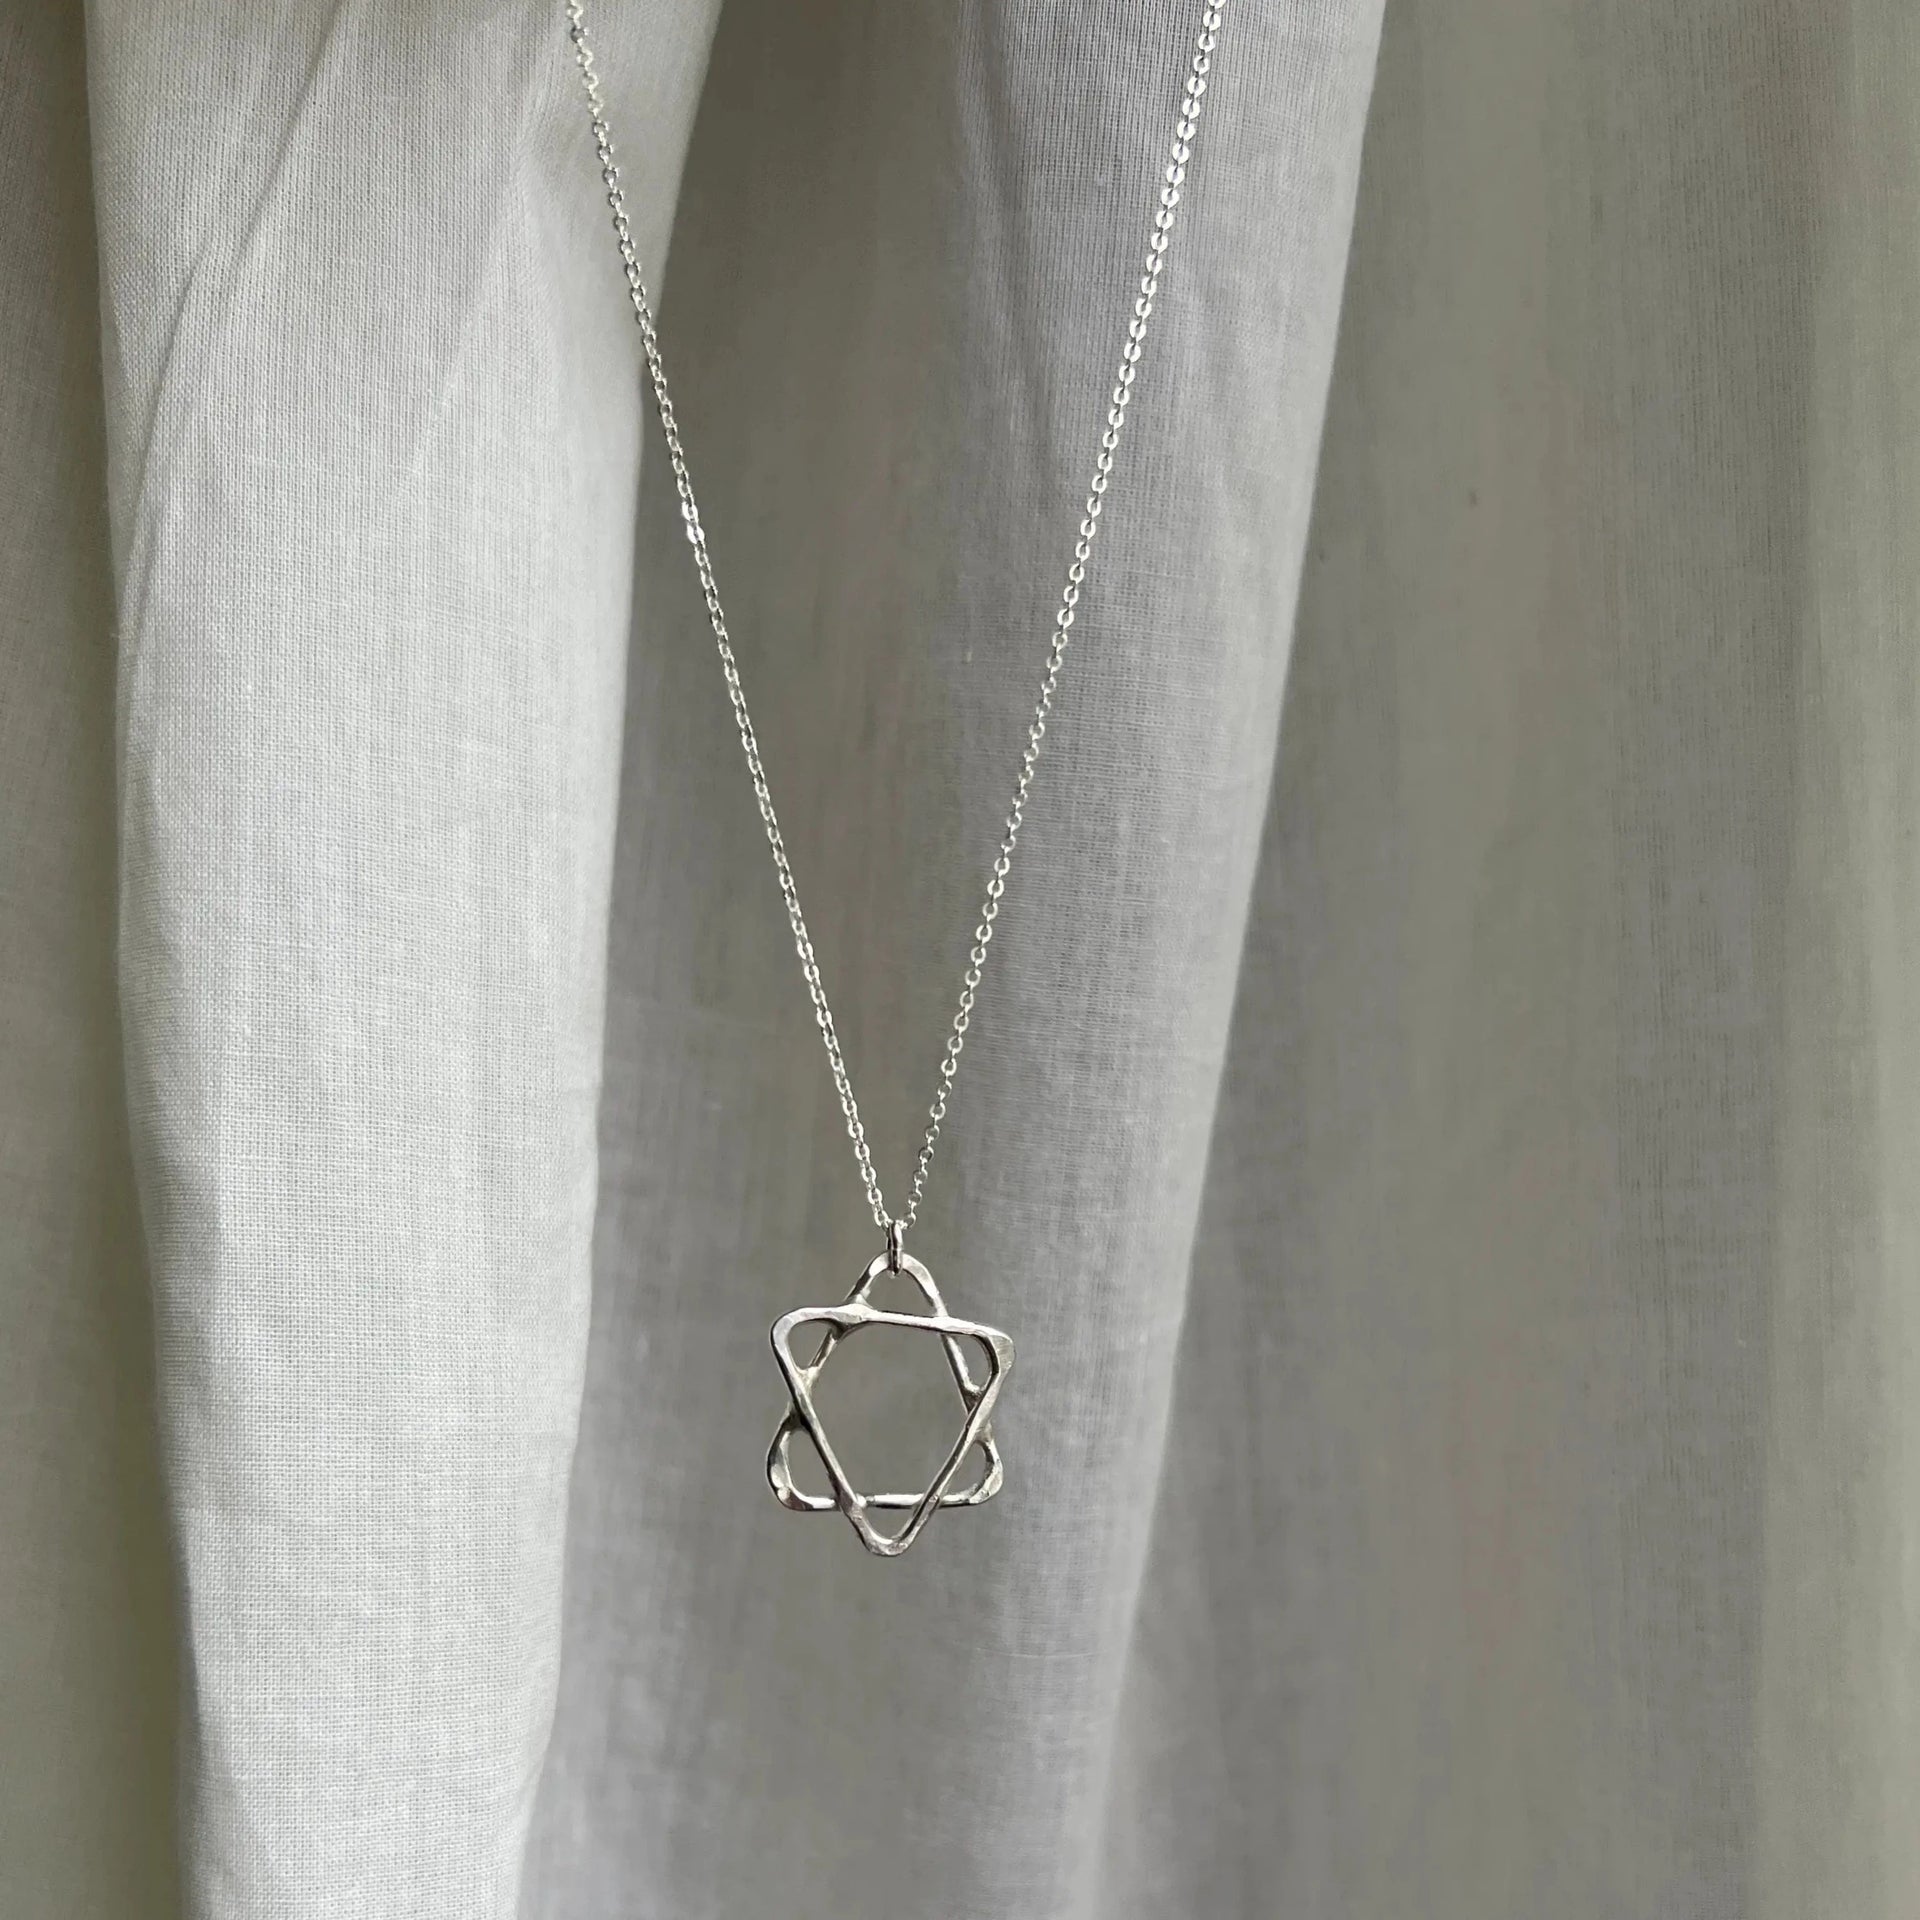 Rachel Pfeffer Necklaces Small Pendant on 18" Chain Sterling Silver Handmade Organic Star of David - (Small or Large)